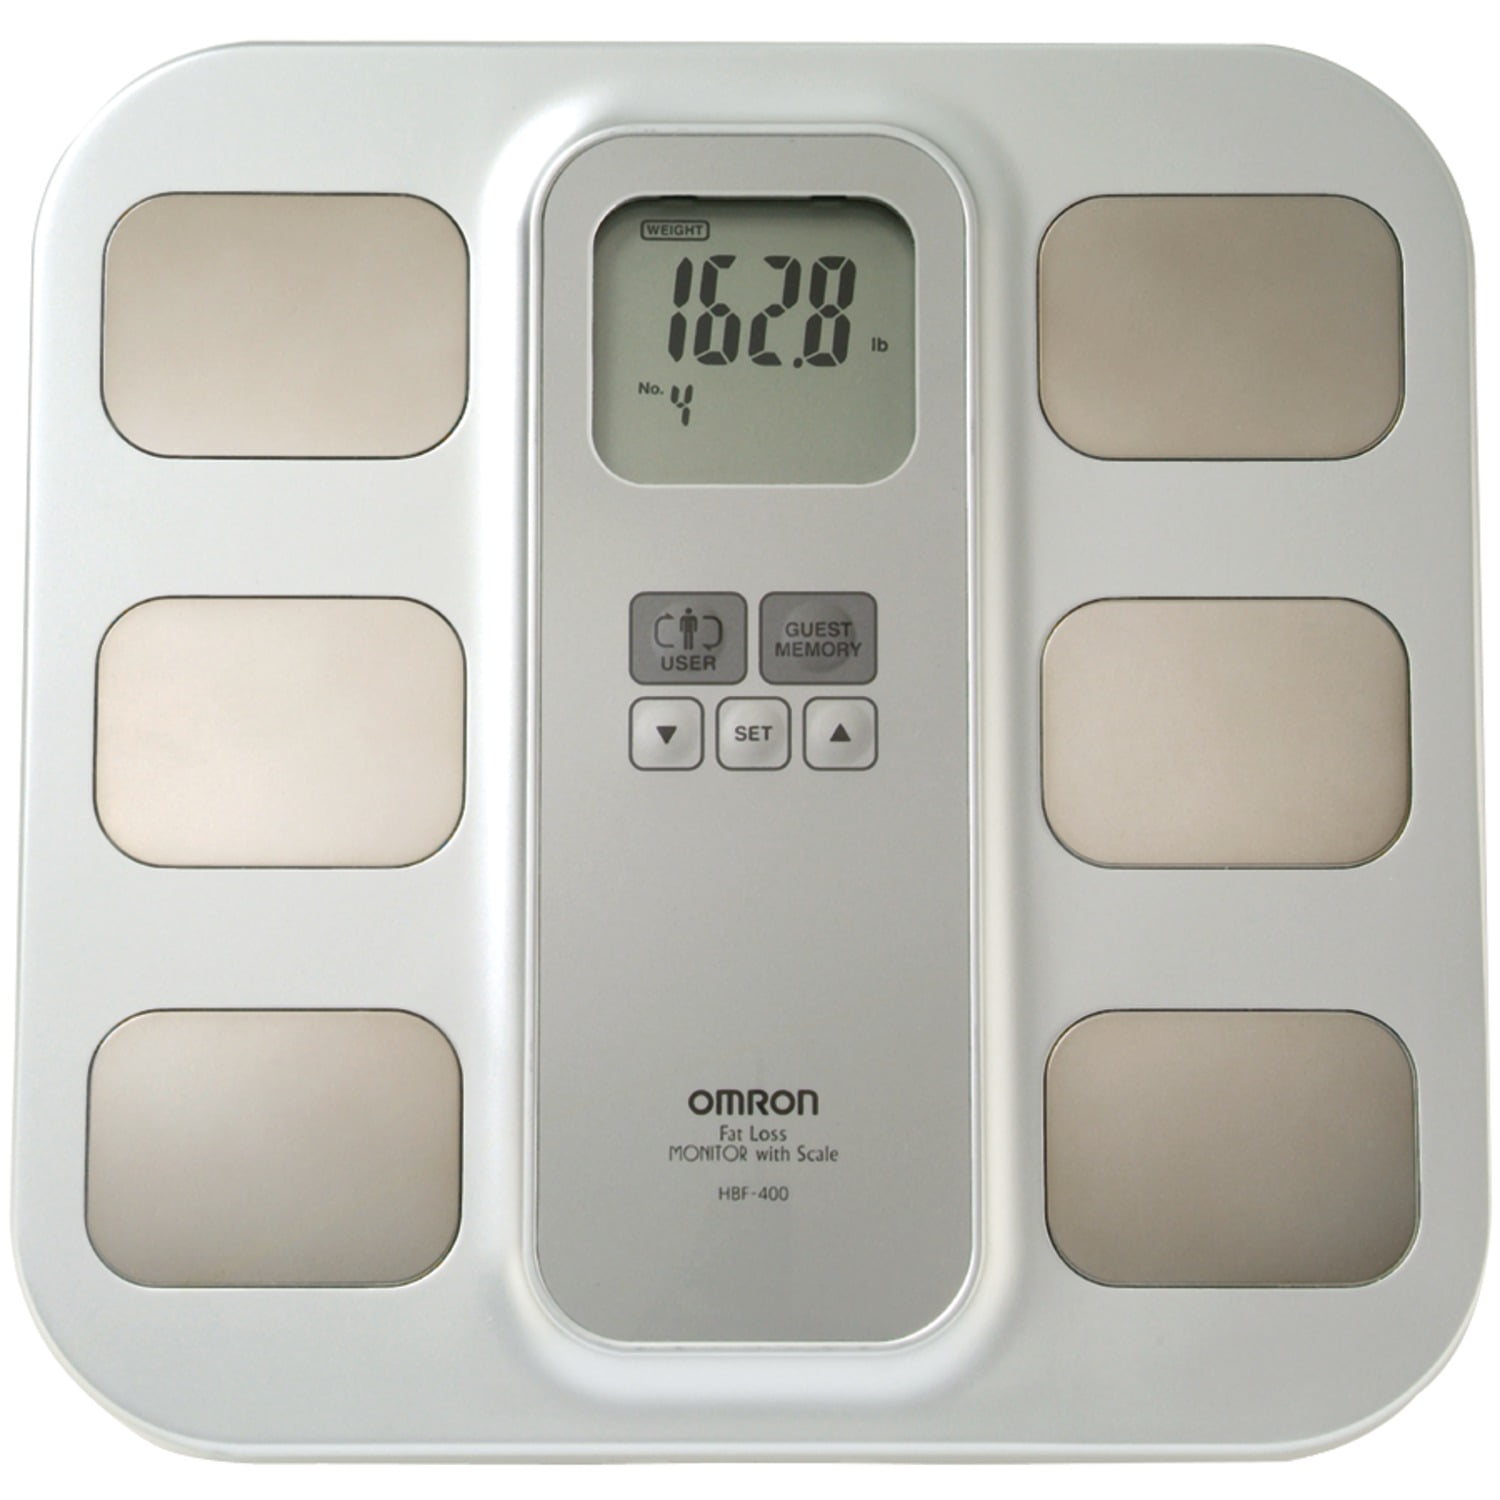 Body Composition Monitor & Digital Weighing Scale - OMRON Healthcare